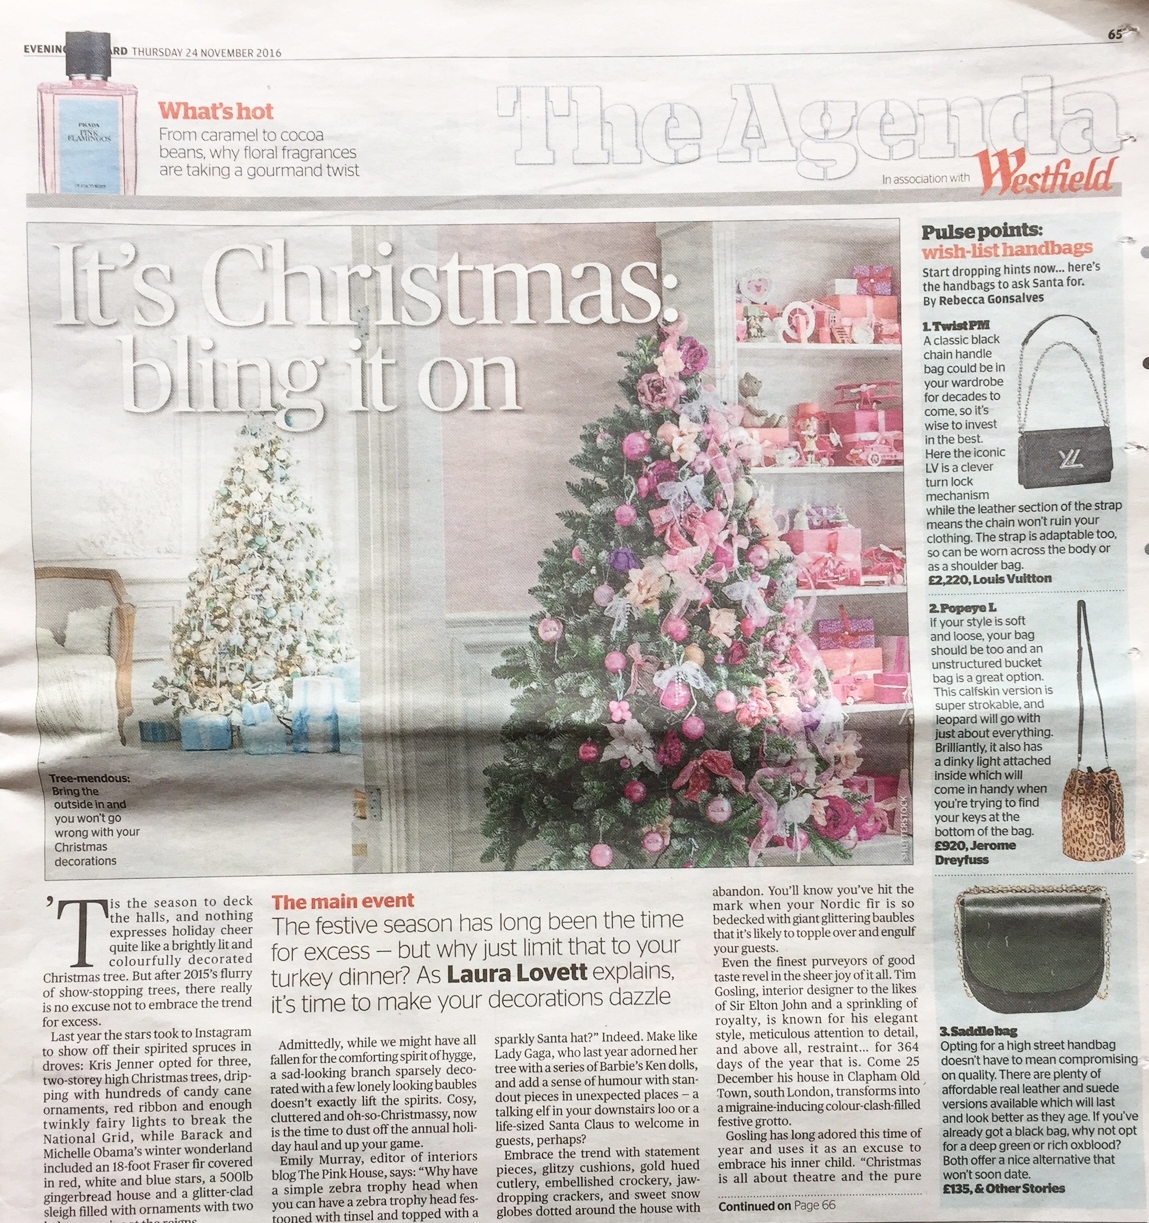 The Pink House on Christmas excessive decor in London Evening Standard